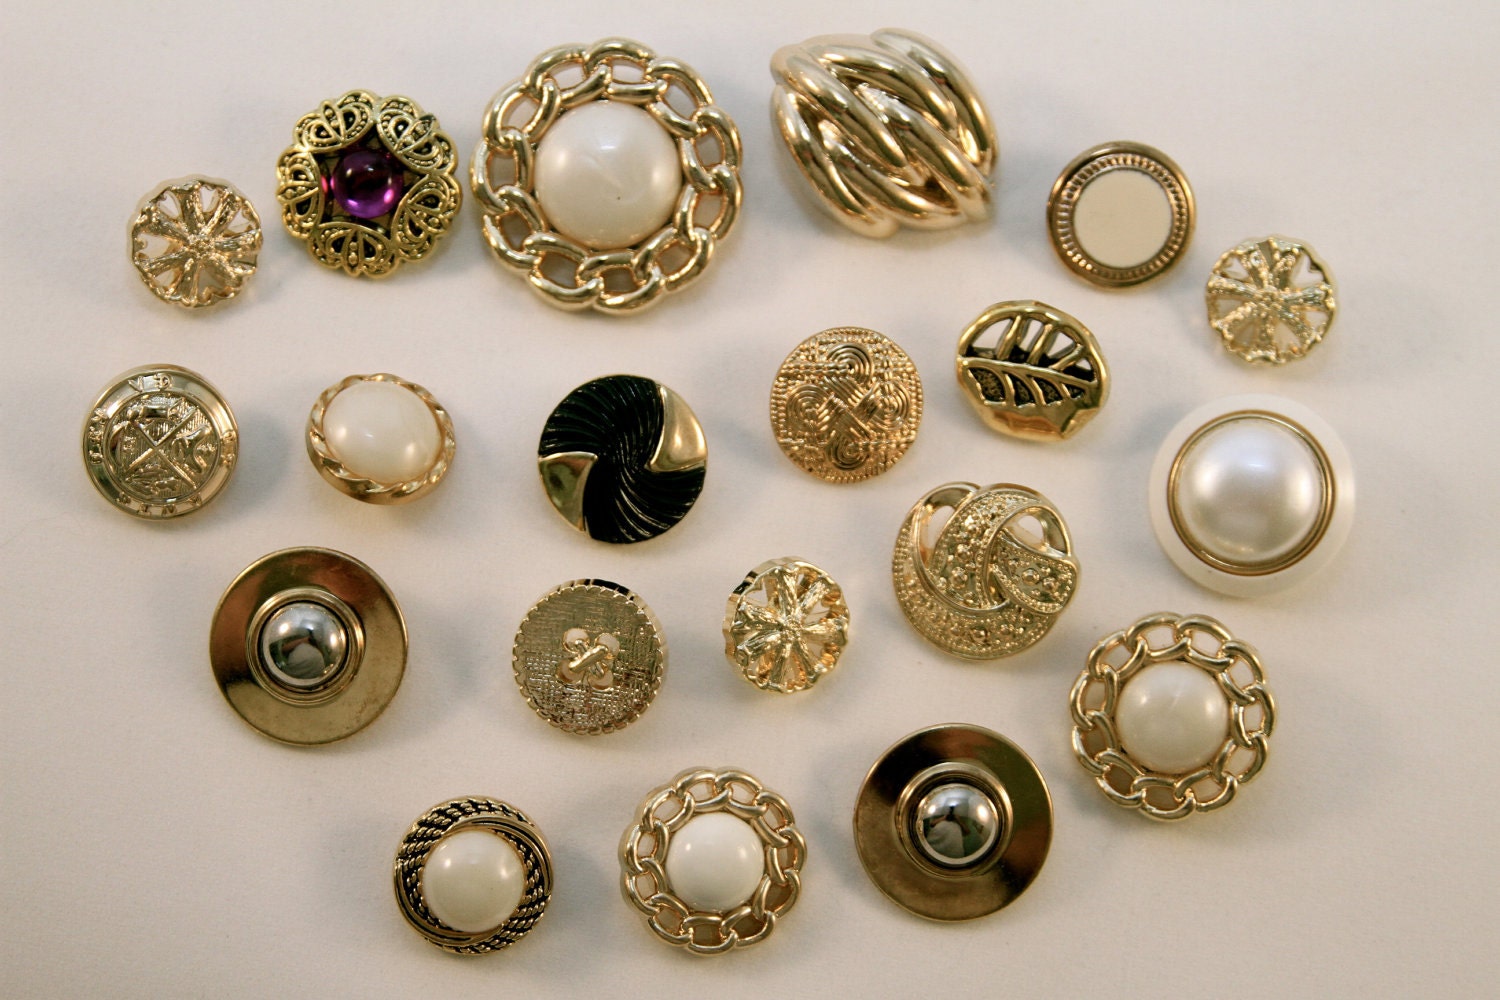 Set of Vintage Style Buttons 20 pc (S2)